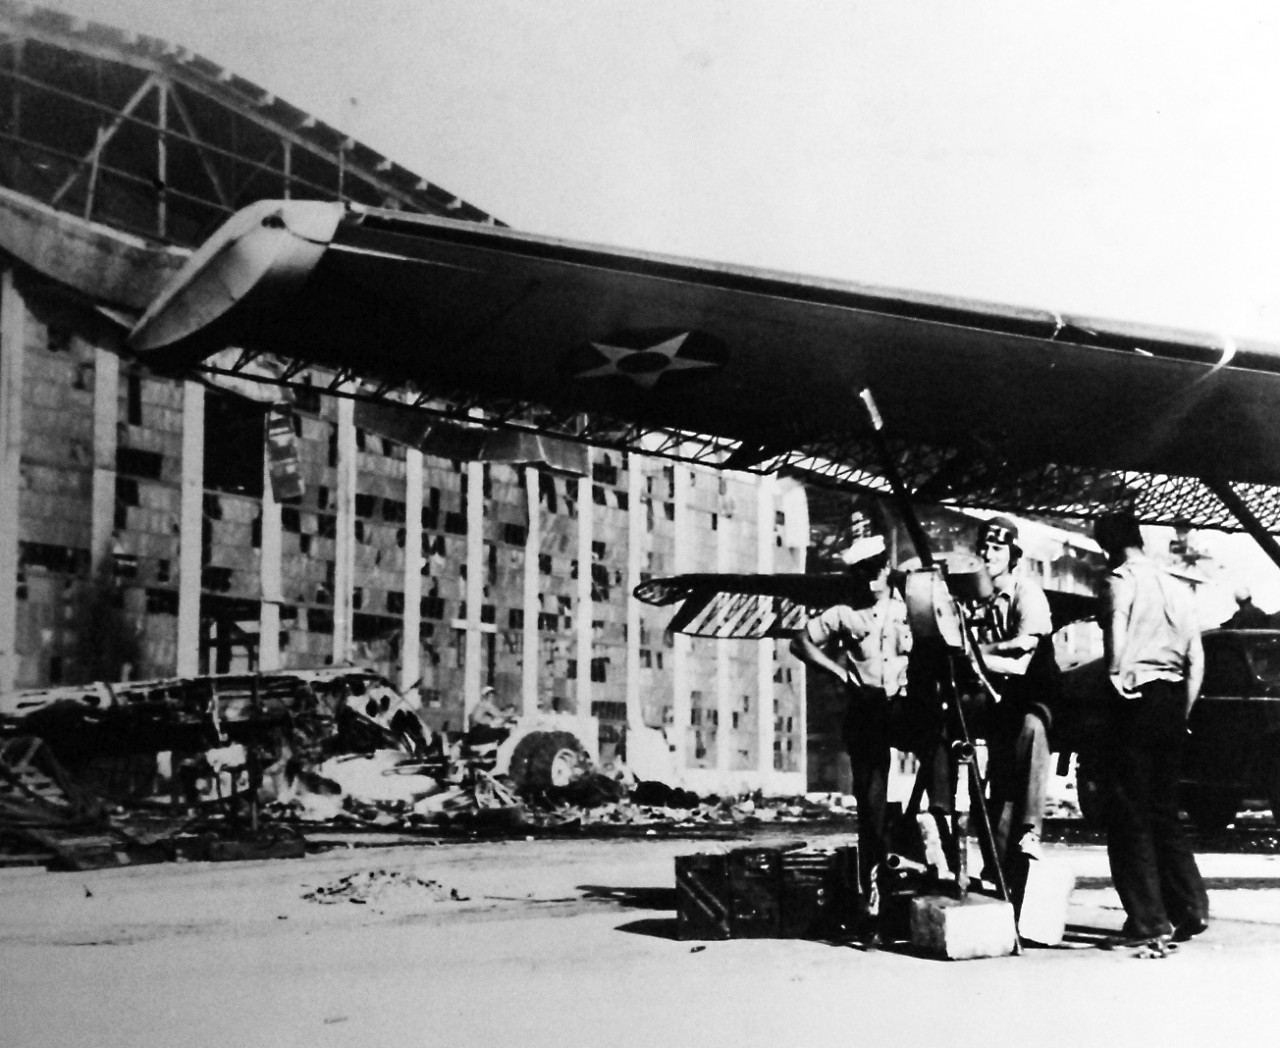 80-G-32895:  Japanese Attack on Pearl Harbor, December 7, 1941.   US Navy patrol plane and gun crew with improvised mount, made of pipe, in front of hangar at Ford Island, Naval Air Station, Pearl Harbor.  Official U.S. Navy photograph, now in the collections of the National Archives.   (8/27/2013).